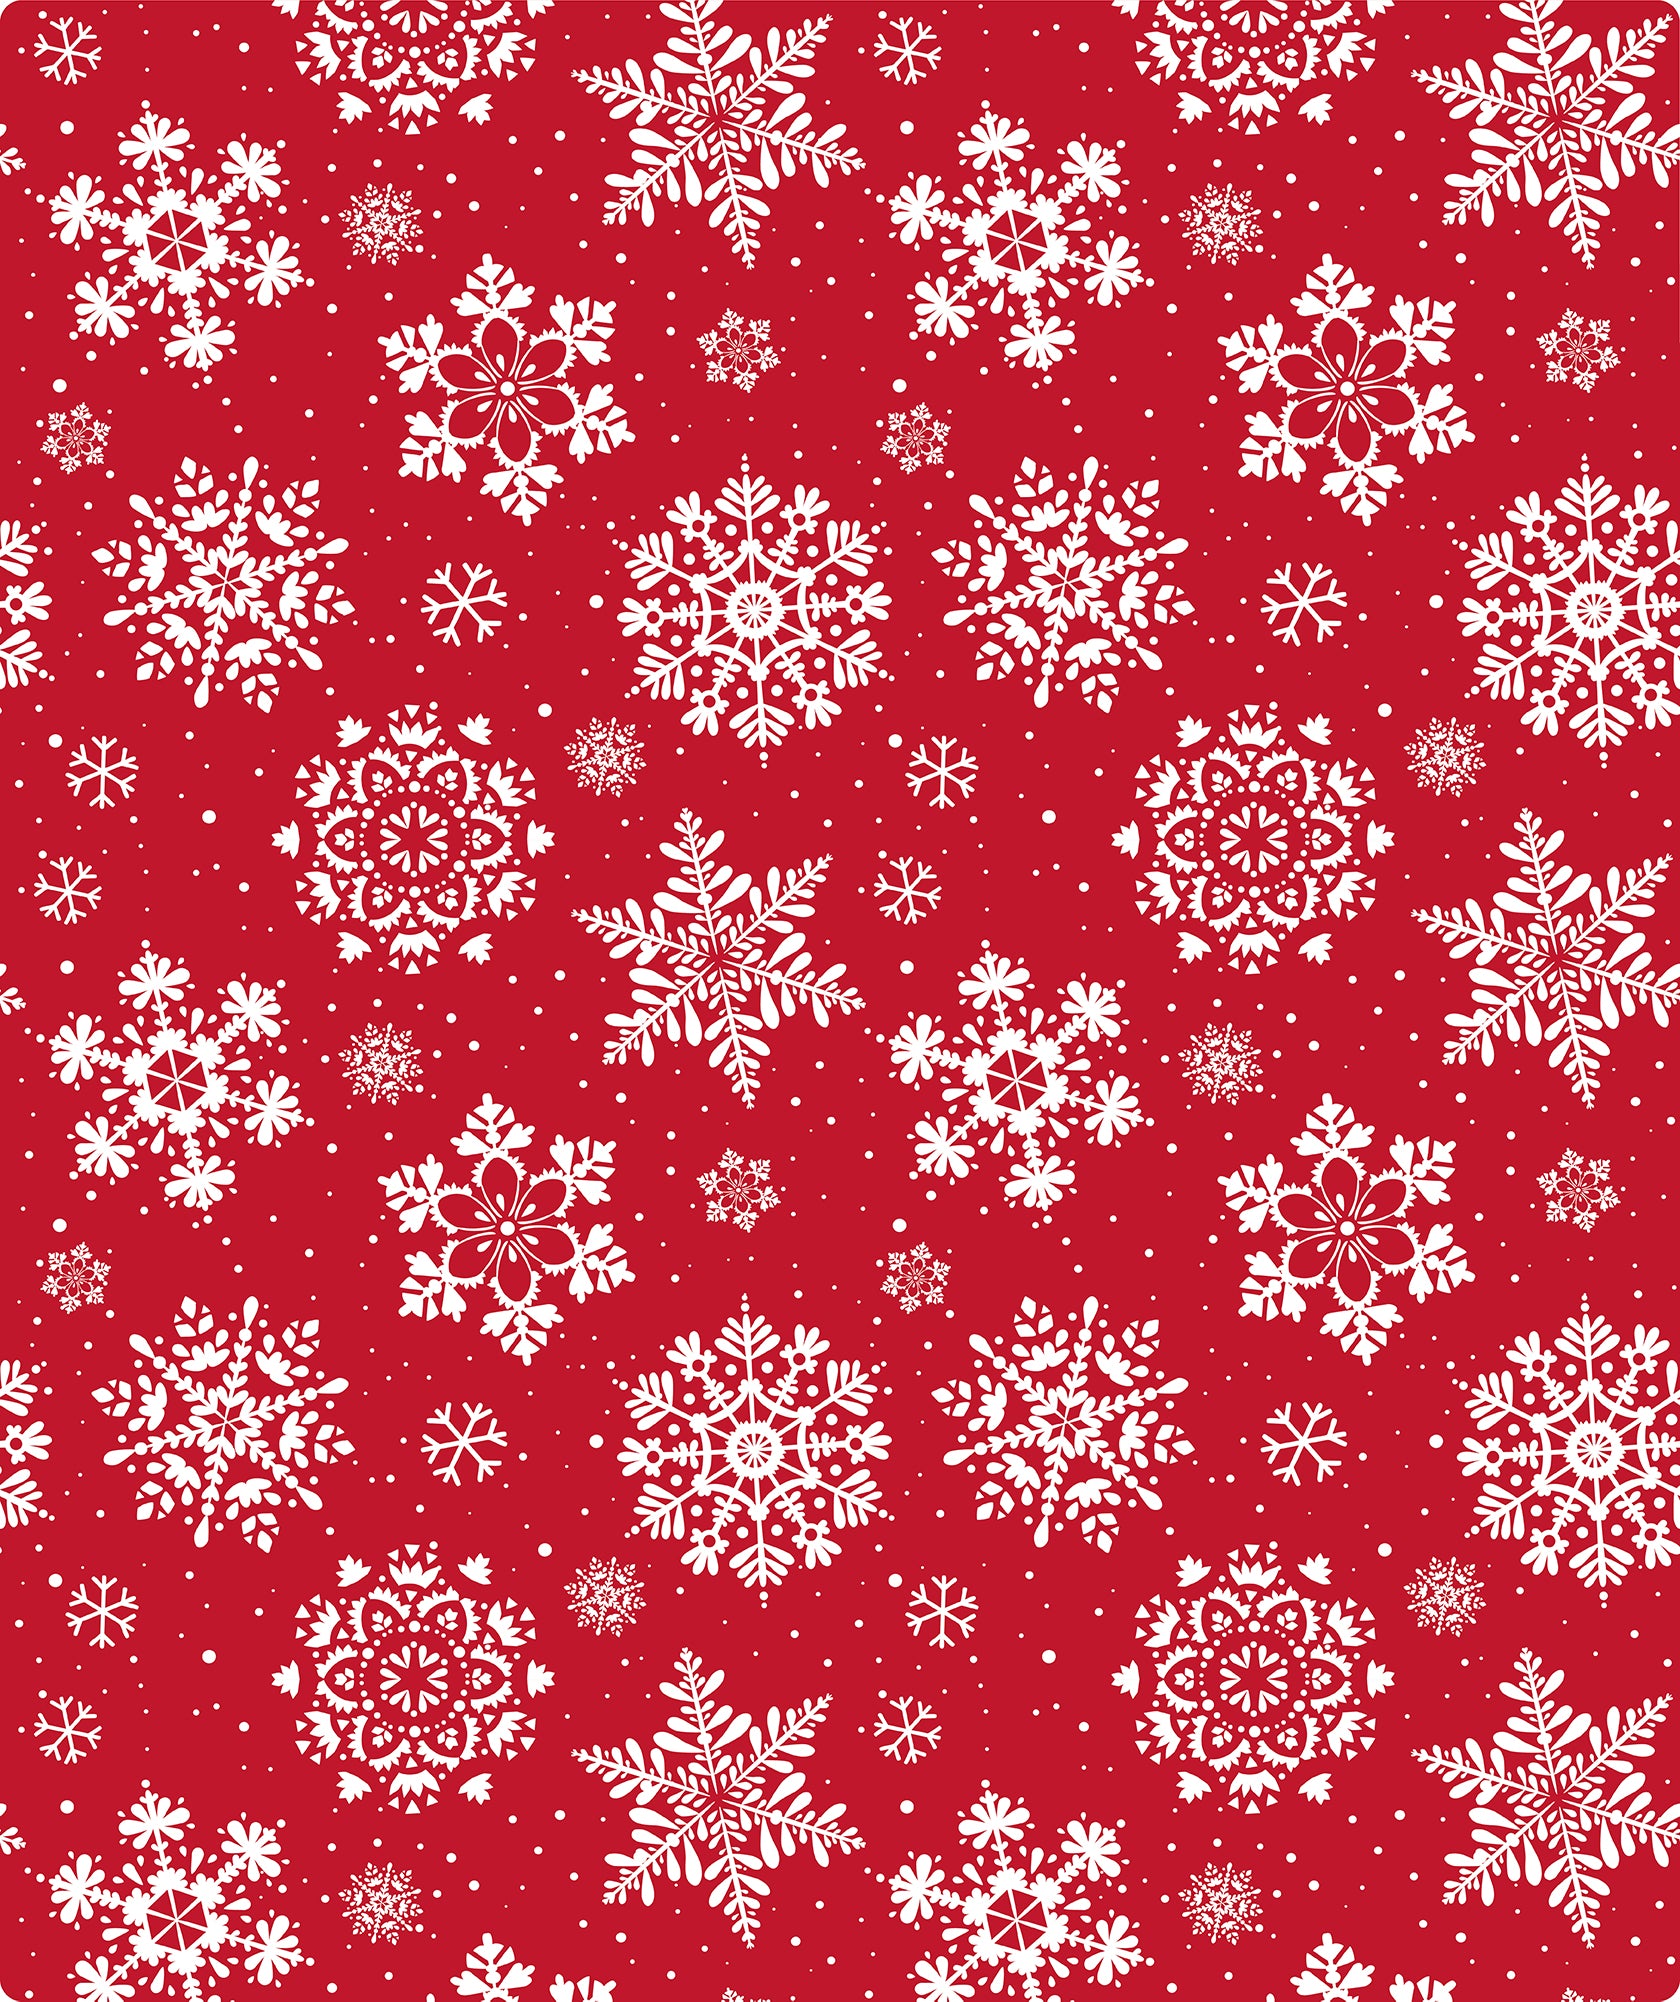 Red ＆ White Red Snowflake Foil Wrapping Paper Roll Wholesale Wrapholic